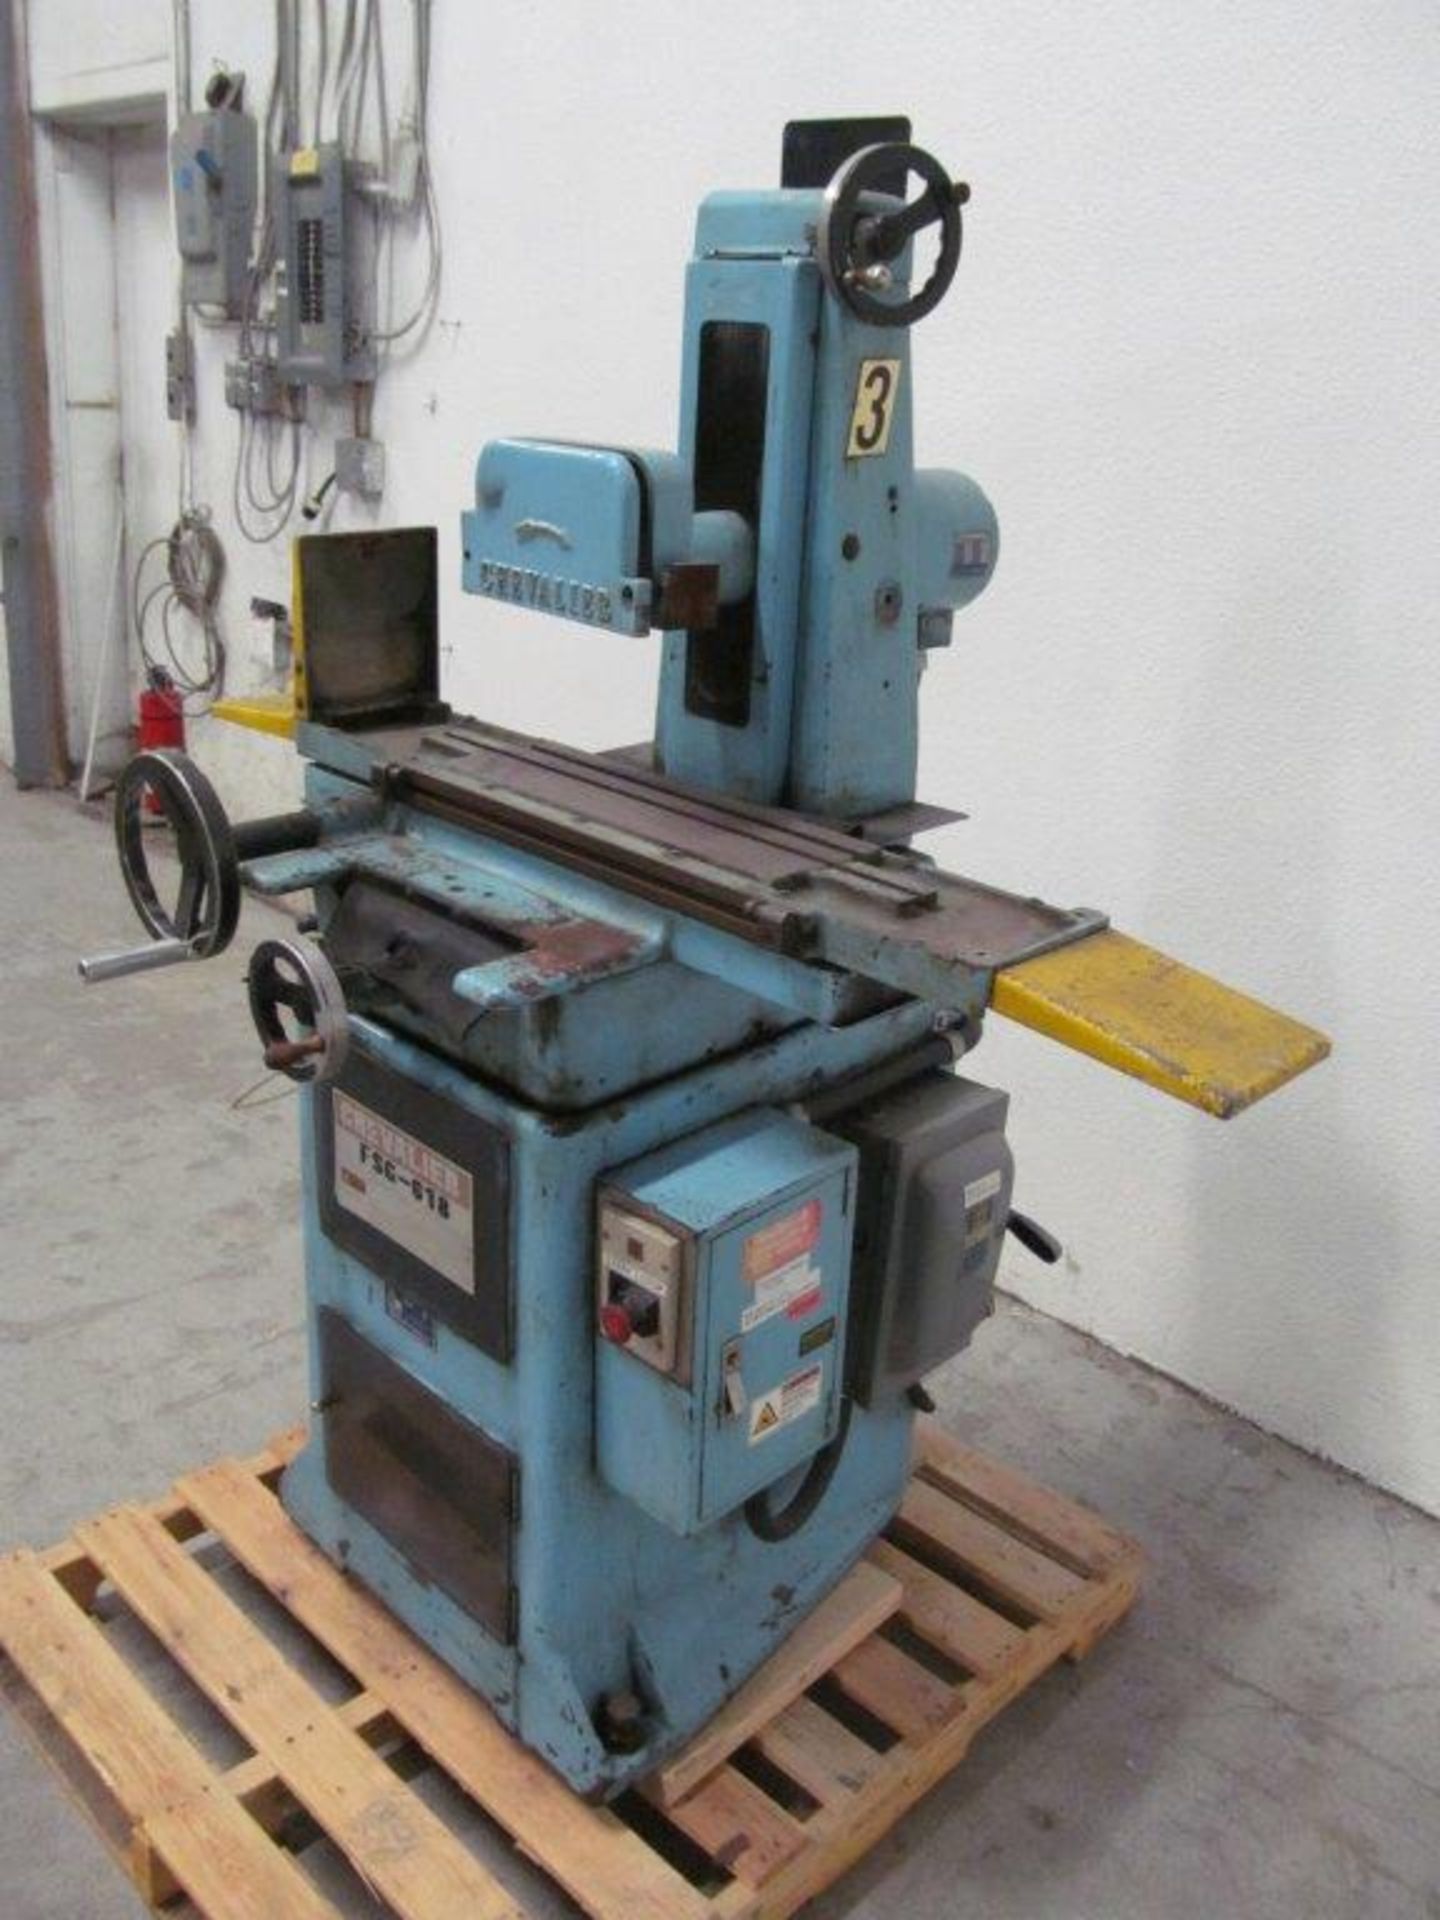 CHEVALIER FSG-618 SURFACE GRINDER, 6" X 18", ELECTRICS: 550V/3PH/60C, "CONDITION UNKNOWN" - Image 2 of 4